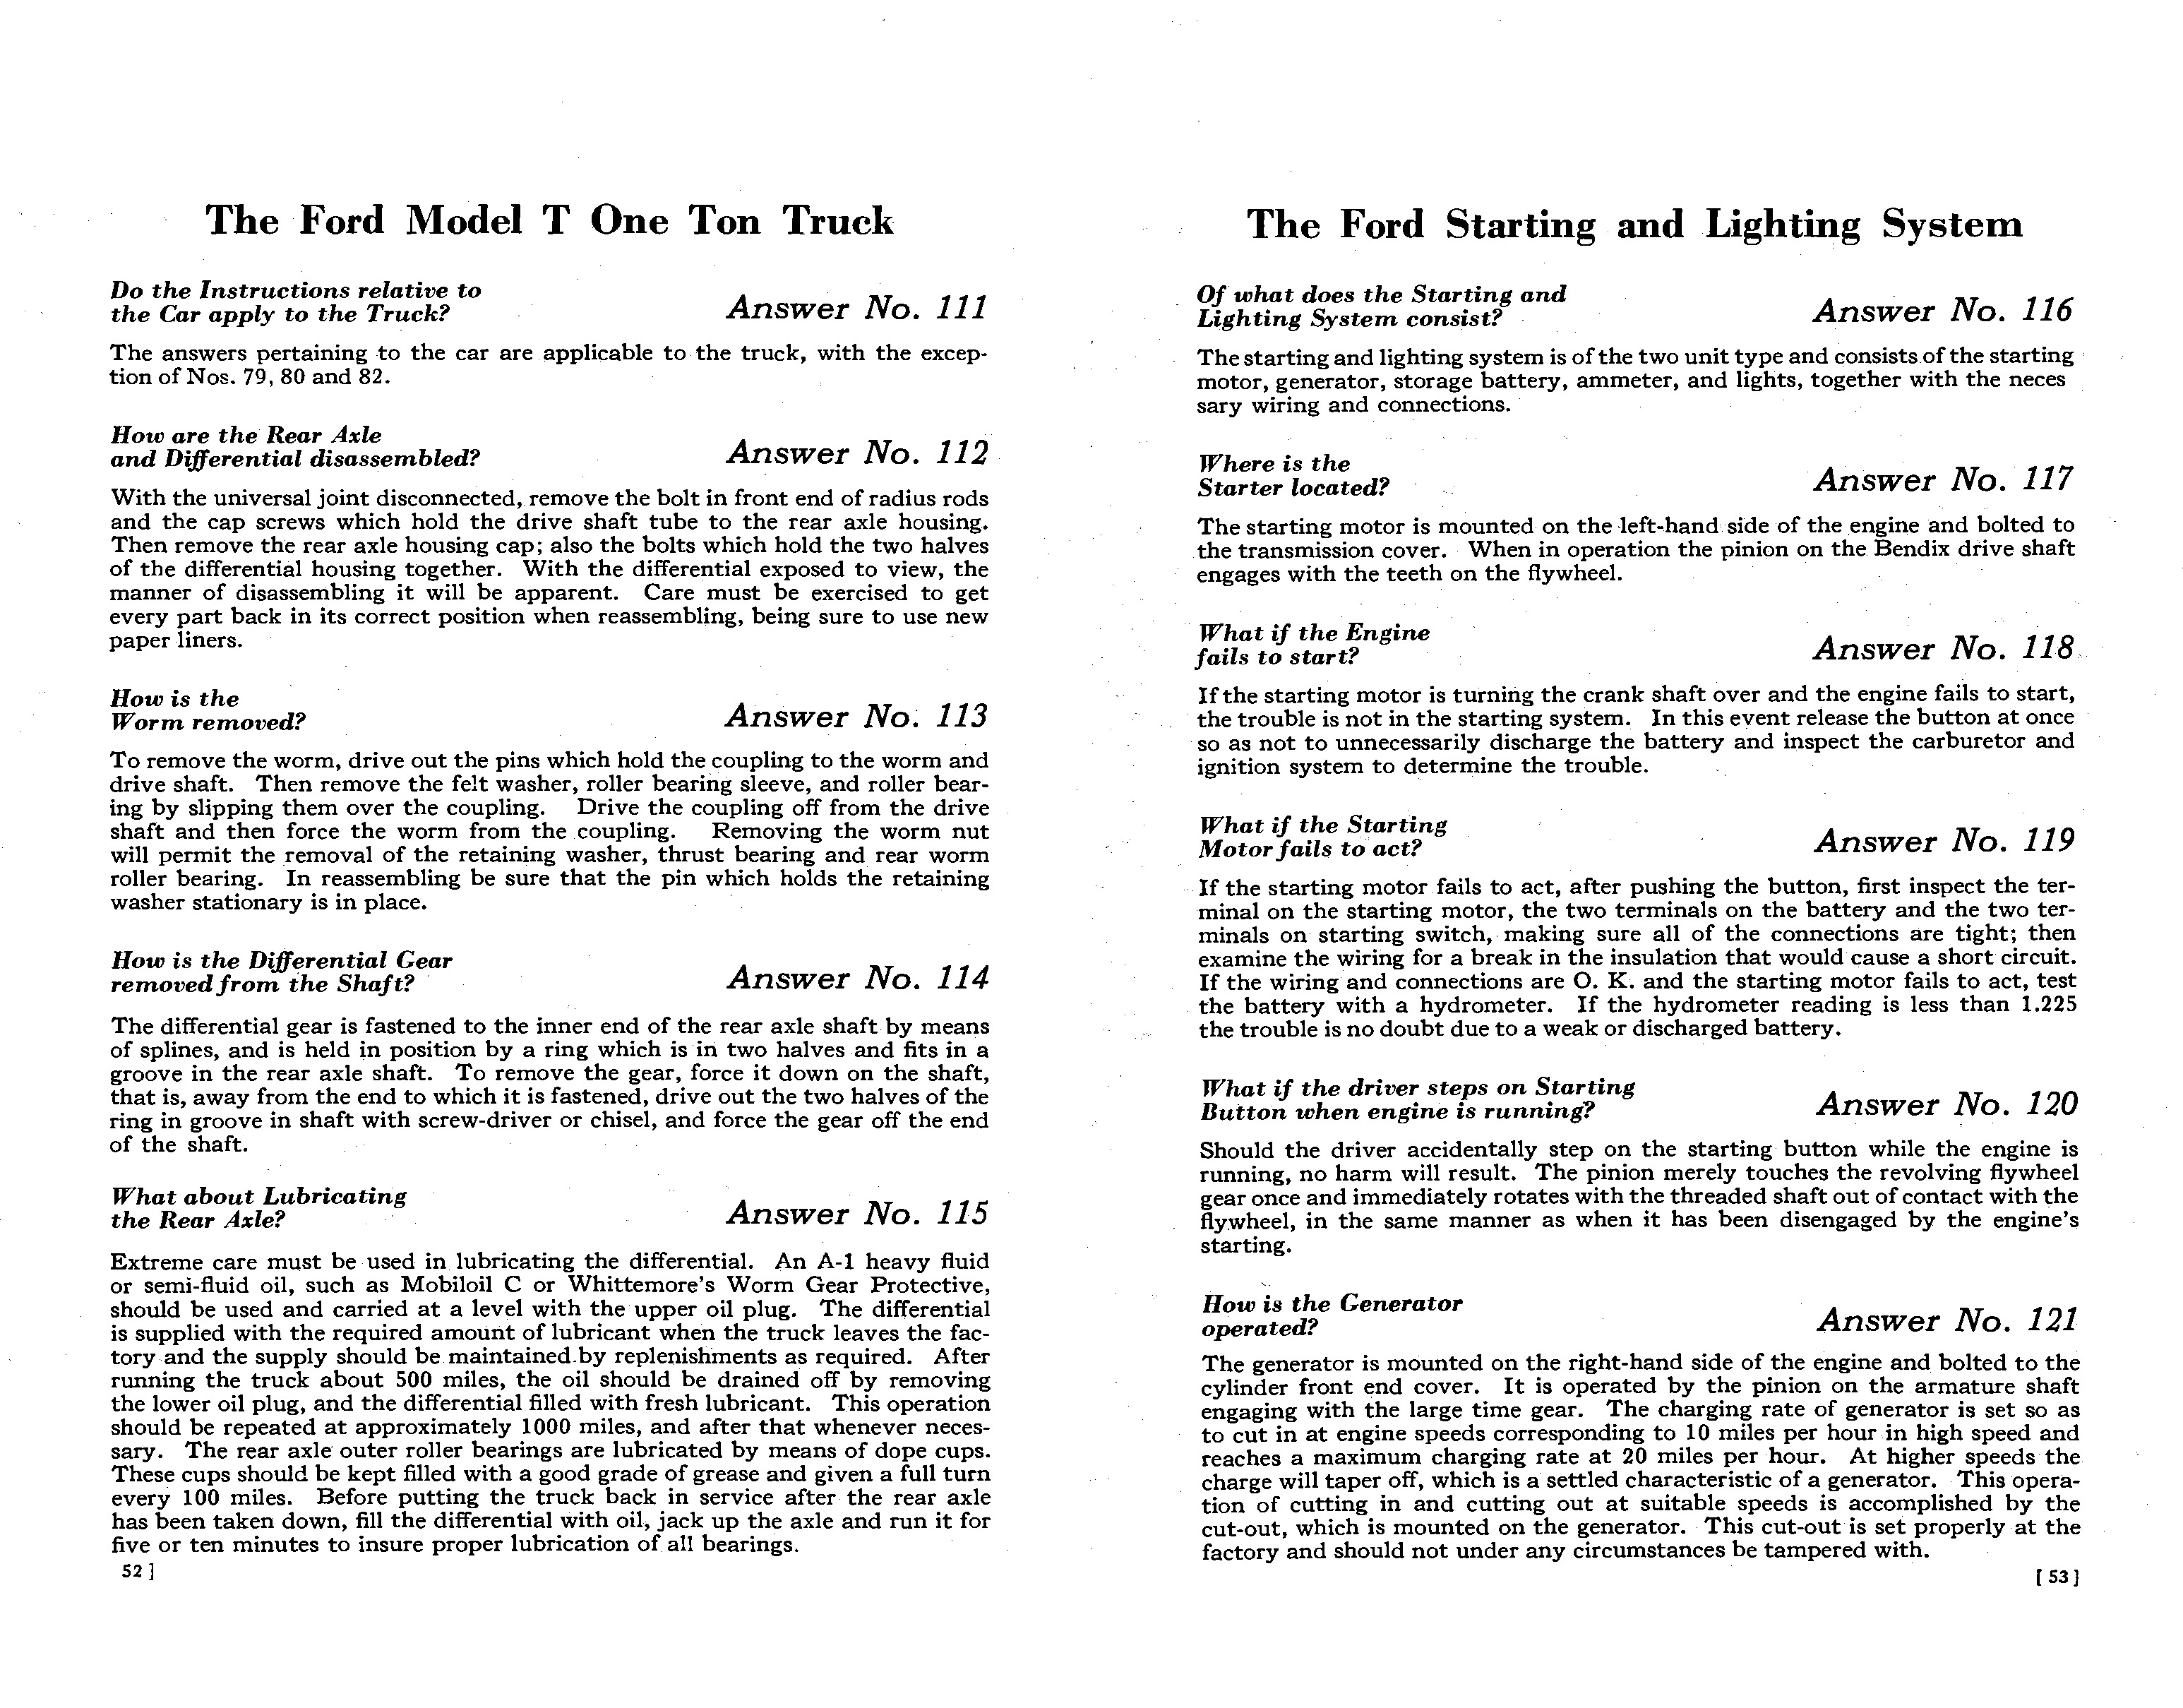 1925_Ford_Owners_Manual-52-53